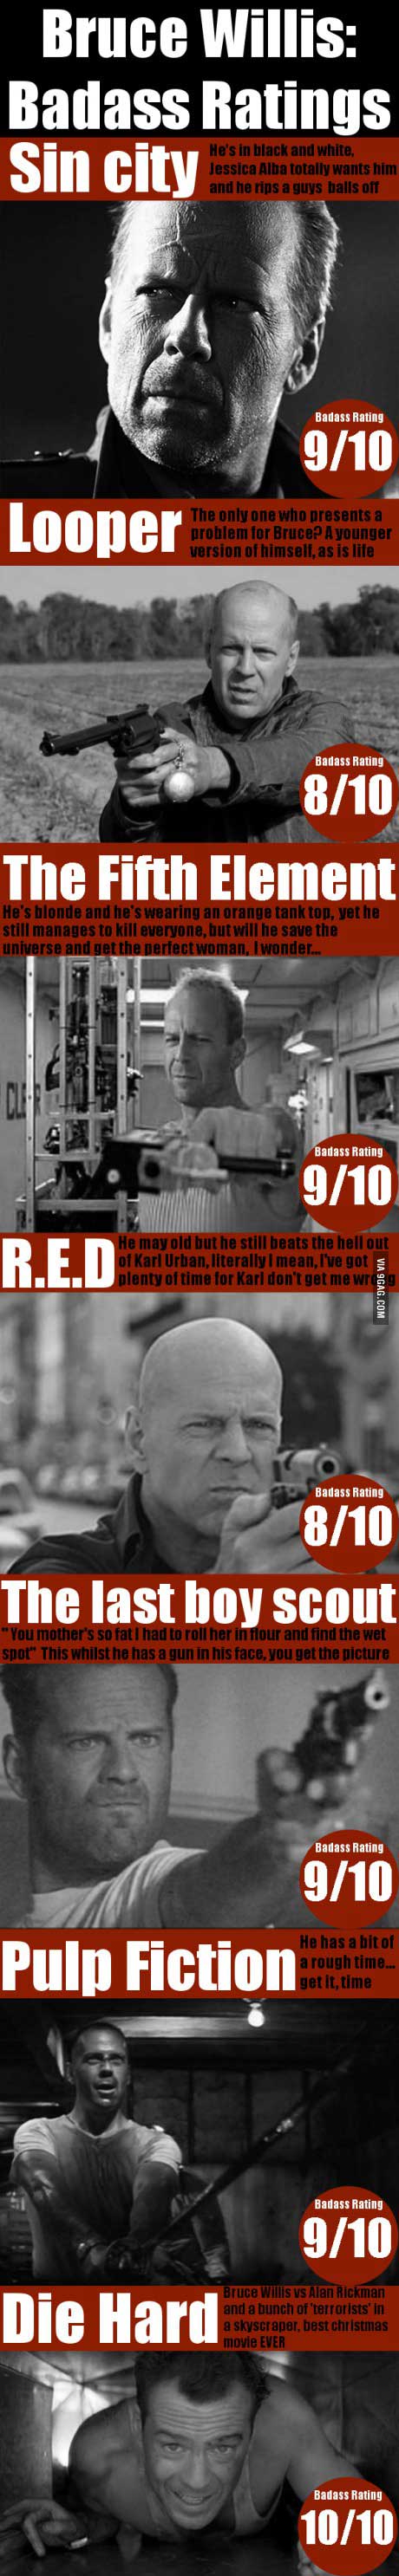 bruce willis, bad ass, movies, ratings